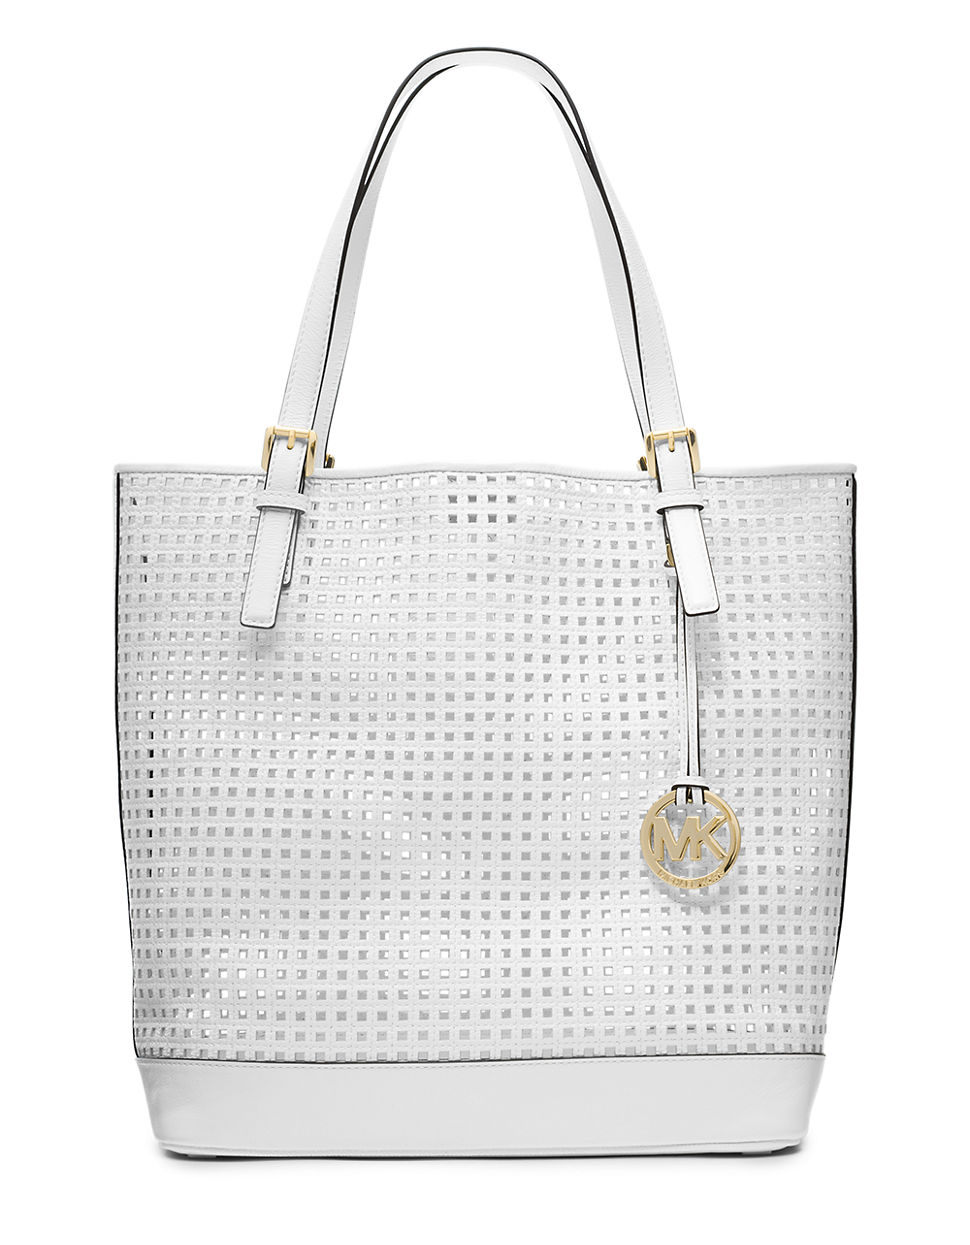 Michael Michael Kors Bridget Perforated Leather Large Tote Bag in White | Lyst